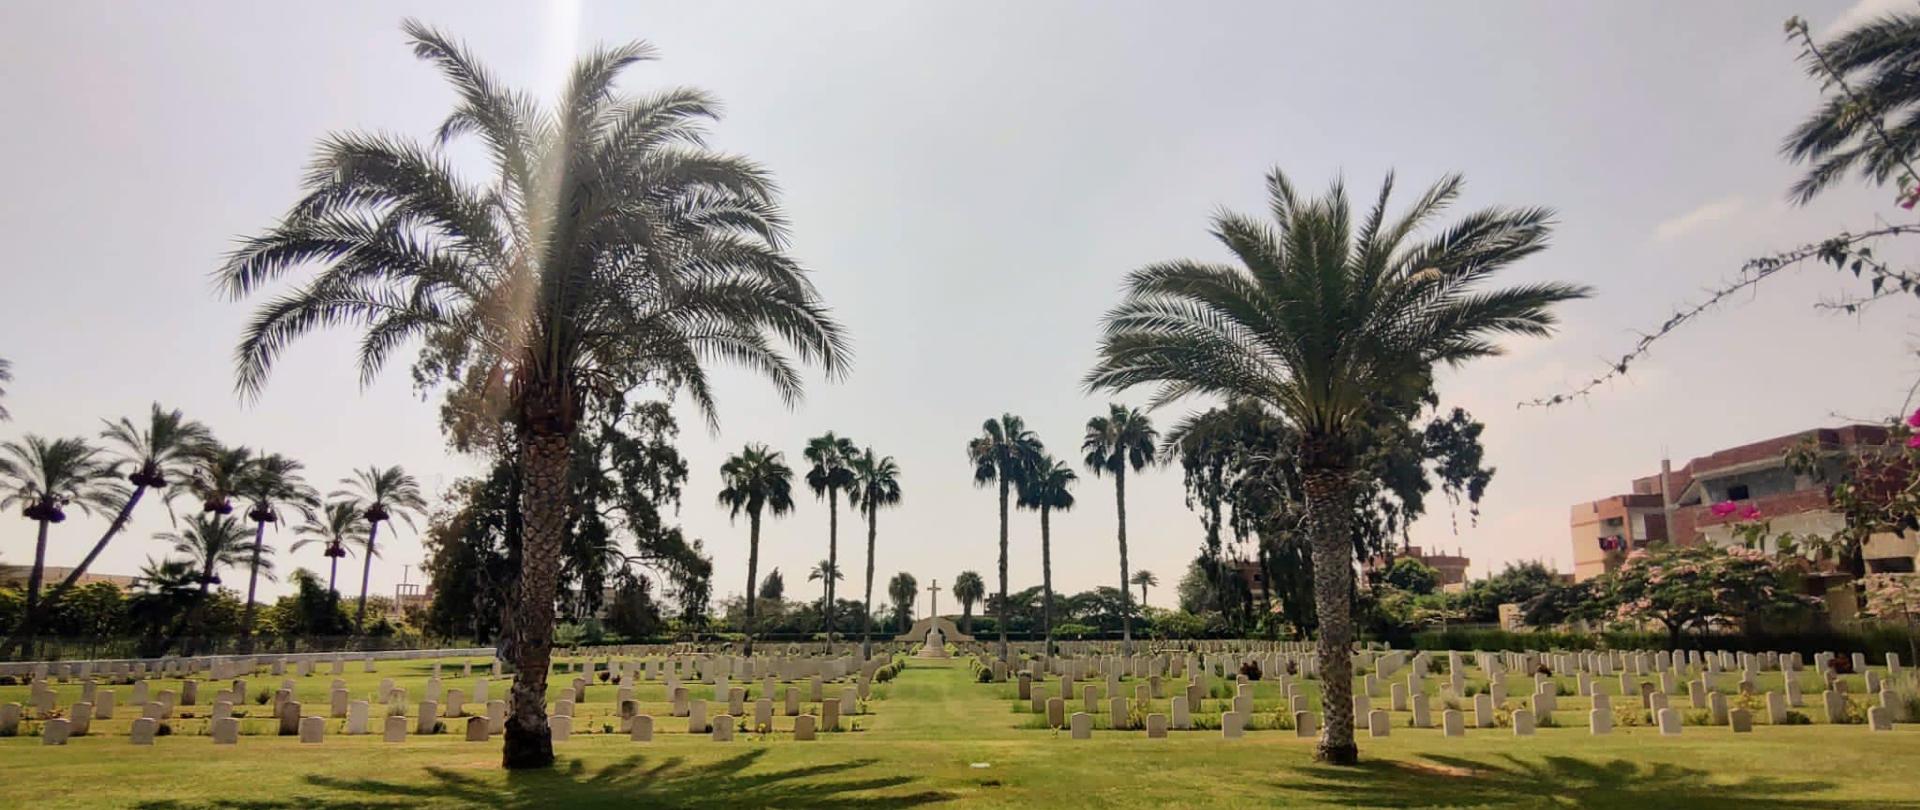 Military Cemetery in Fayid